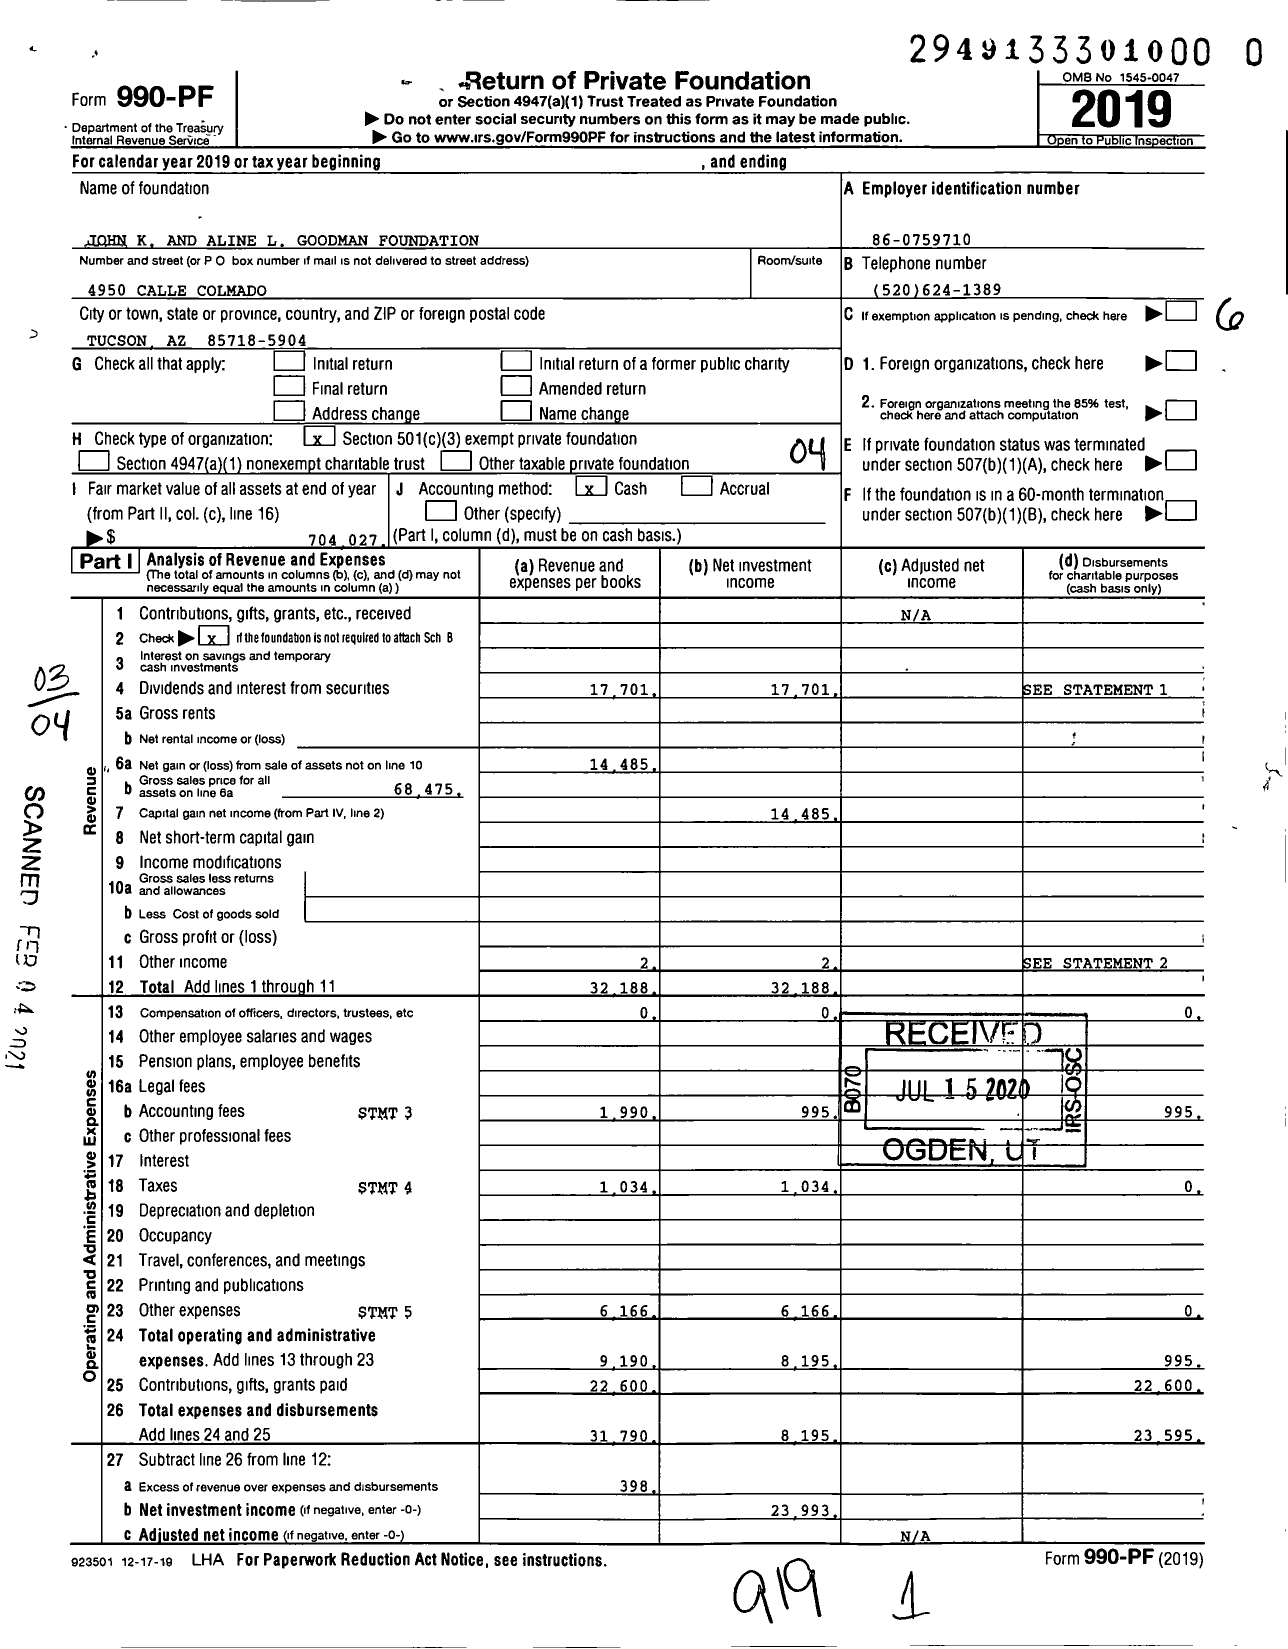 Image of first page of 2019 Form 990PF for John K and Aline L Goodman Foundation